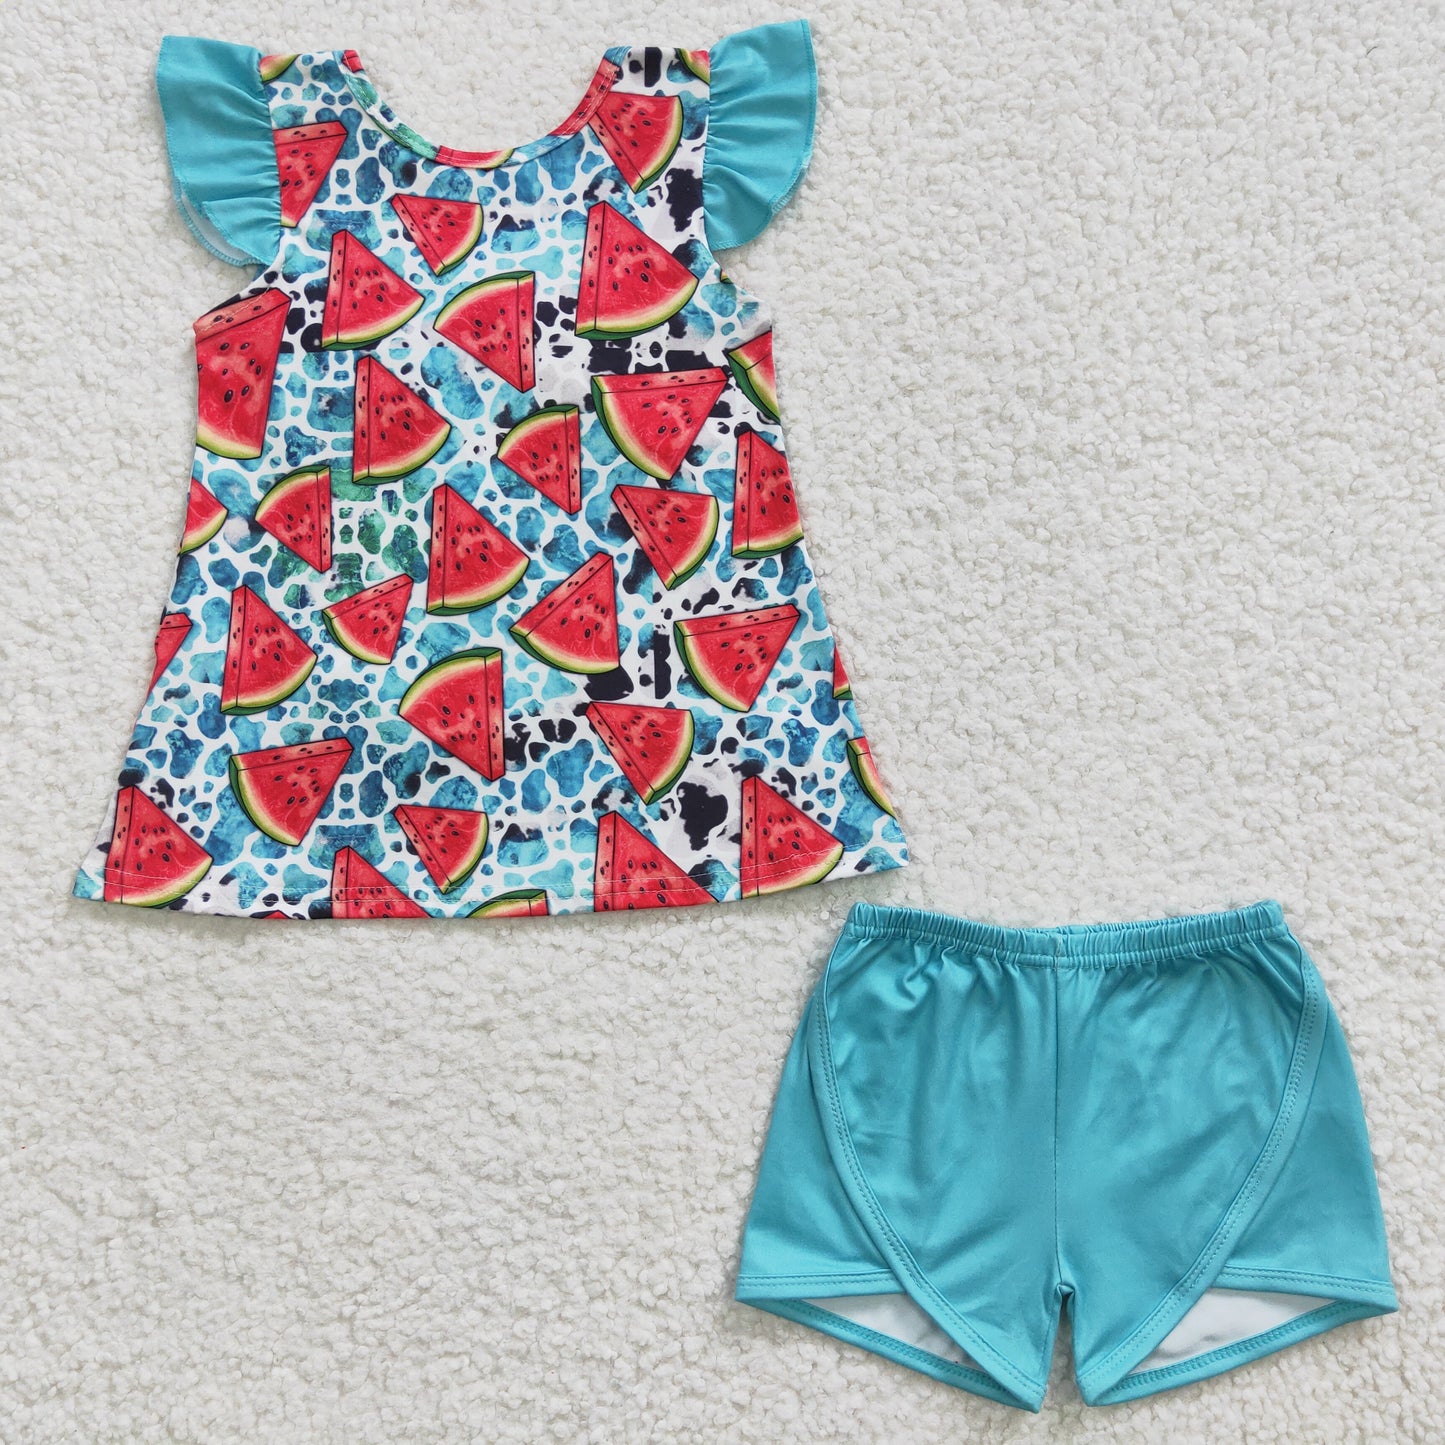 (Promotion)Girls watermelon print summer outfit    GSSO0137